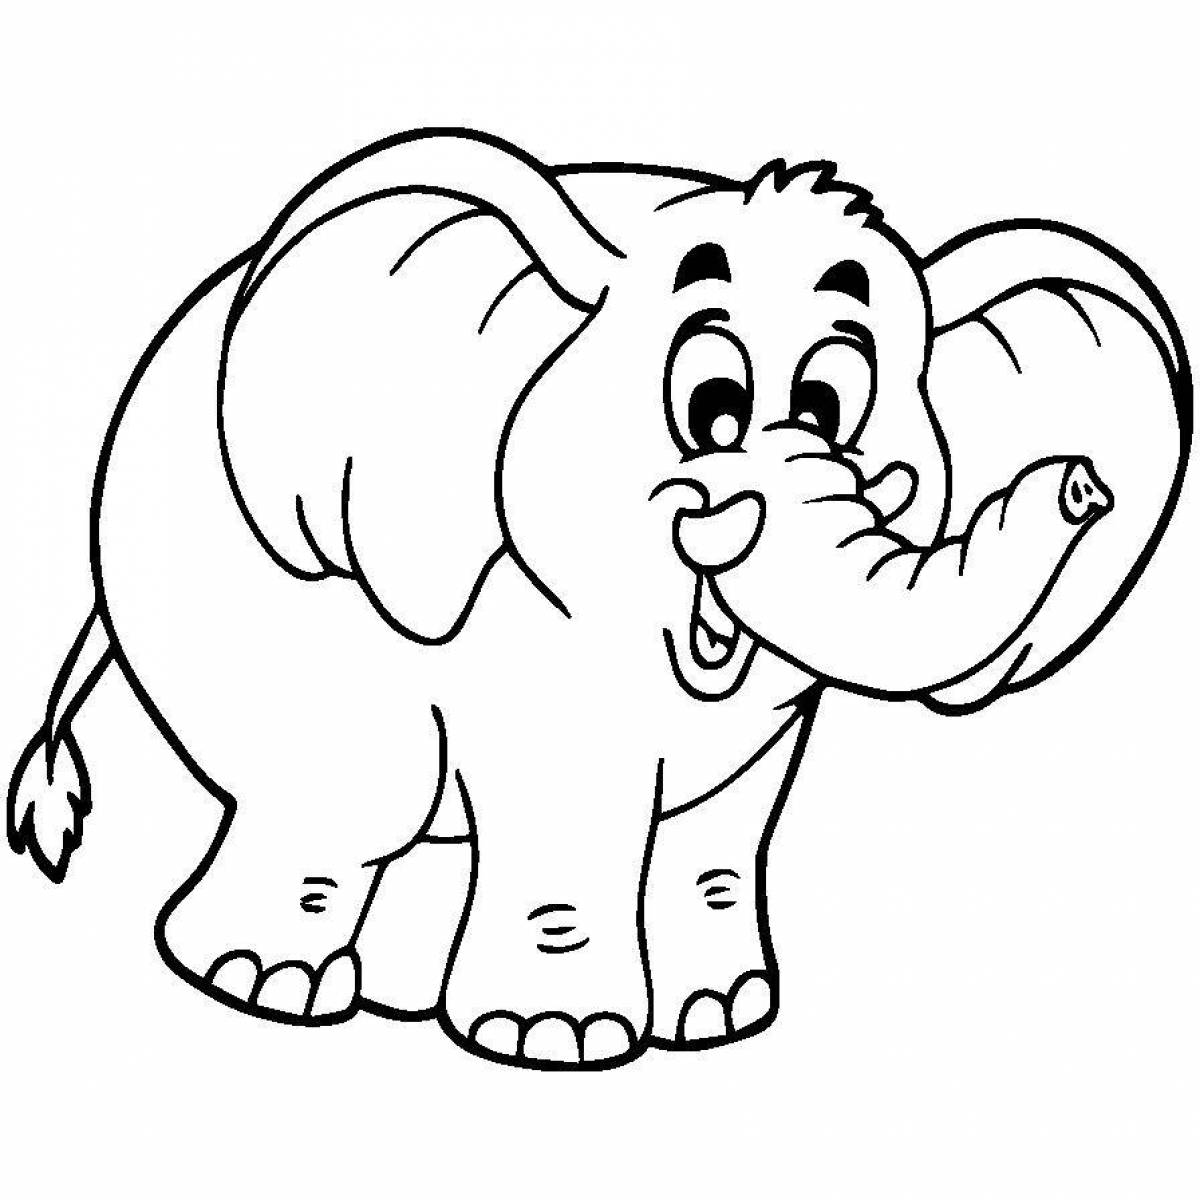 Deluxe elephant coloring book